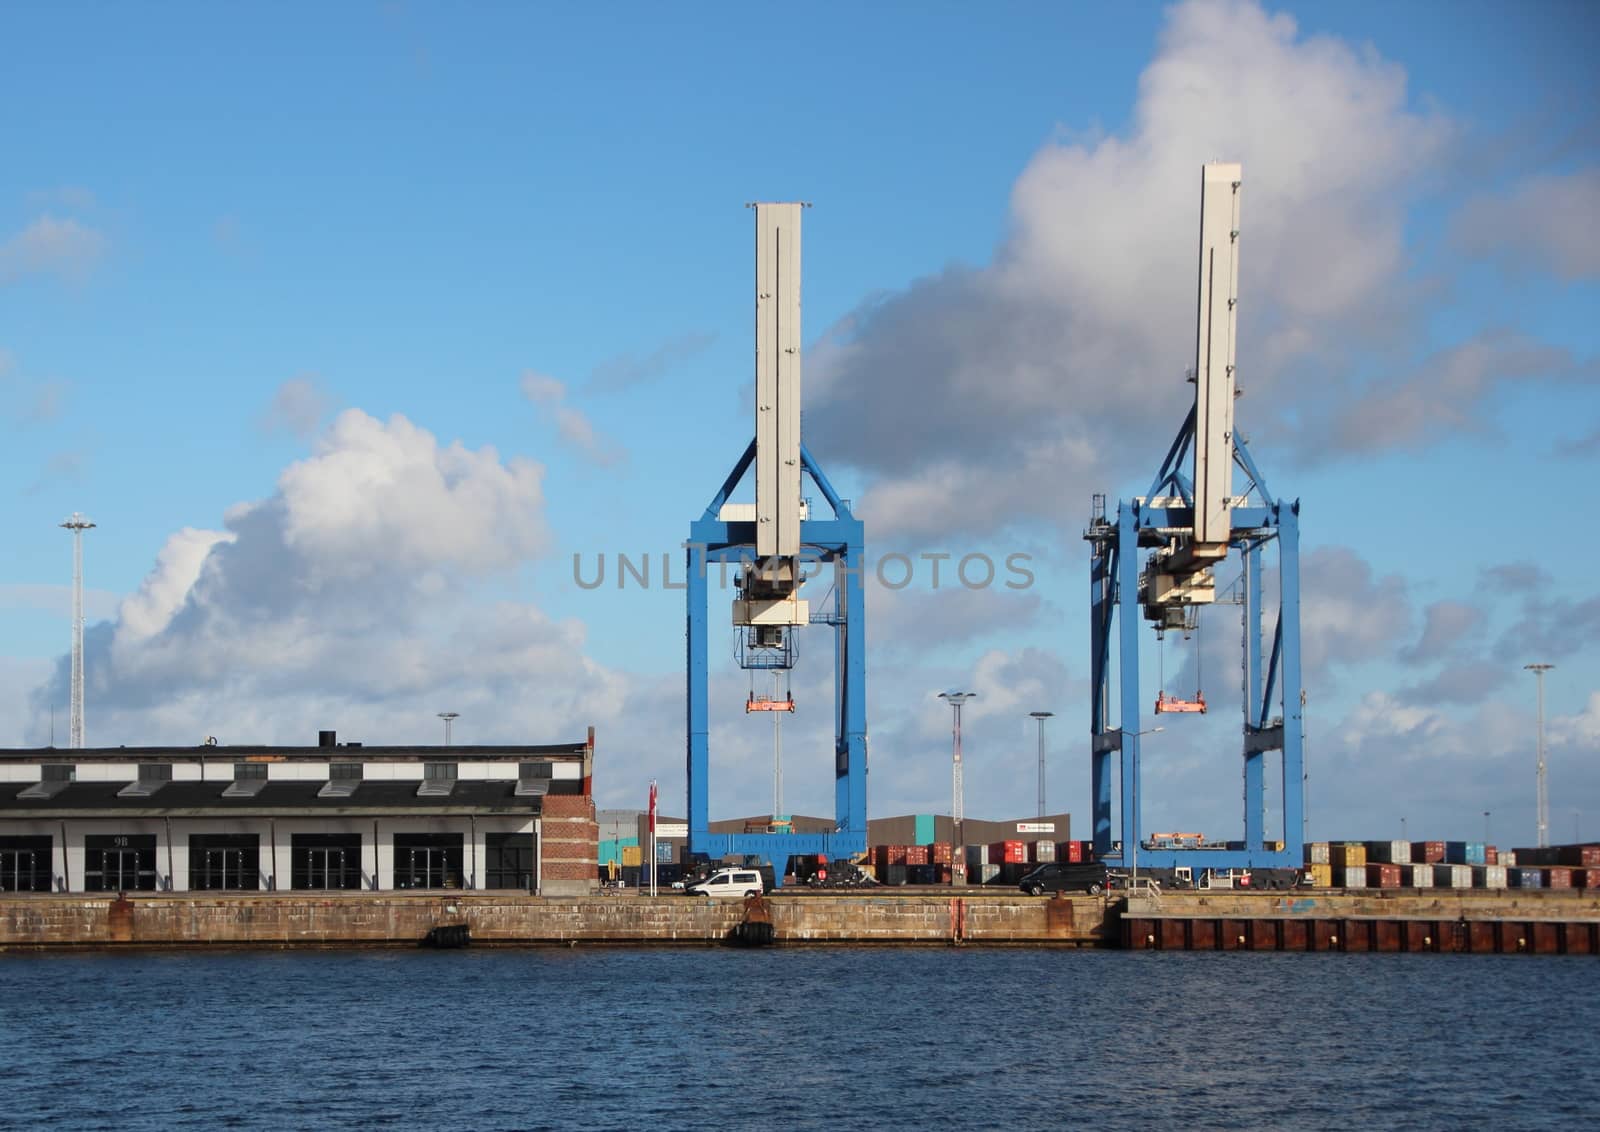 Container Cranes at Harbor Pier with Water Front by HoleInTheBox